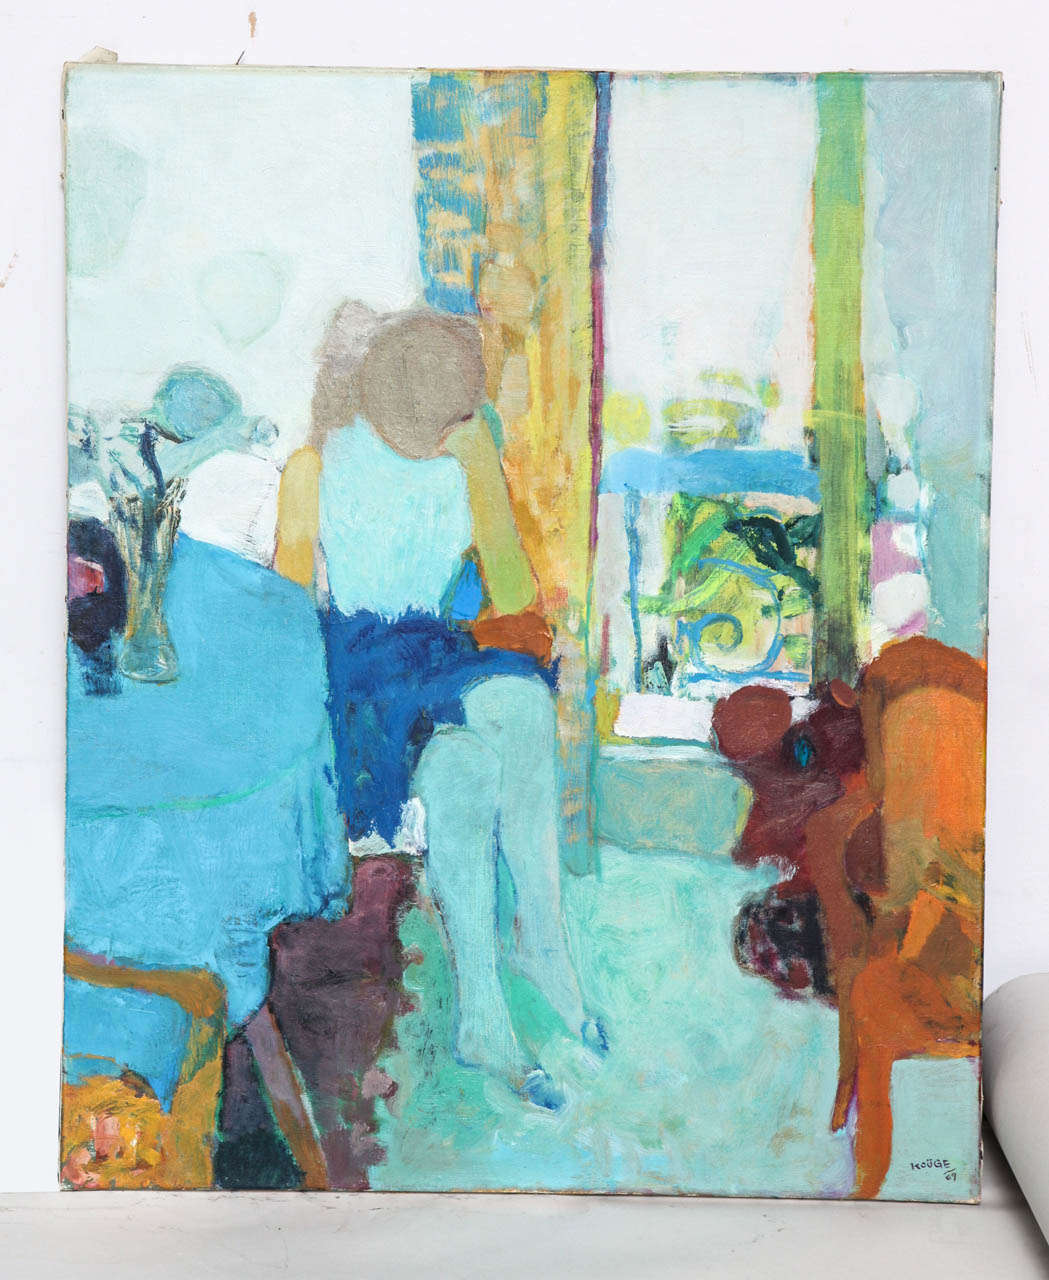 A great oil on canvas reminiscent of Bonnard.  'Femme au table Bleu' by Japanese artist Koüge who worked in Paris during the 1960s is signed and dated 1969